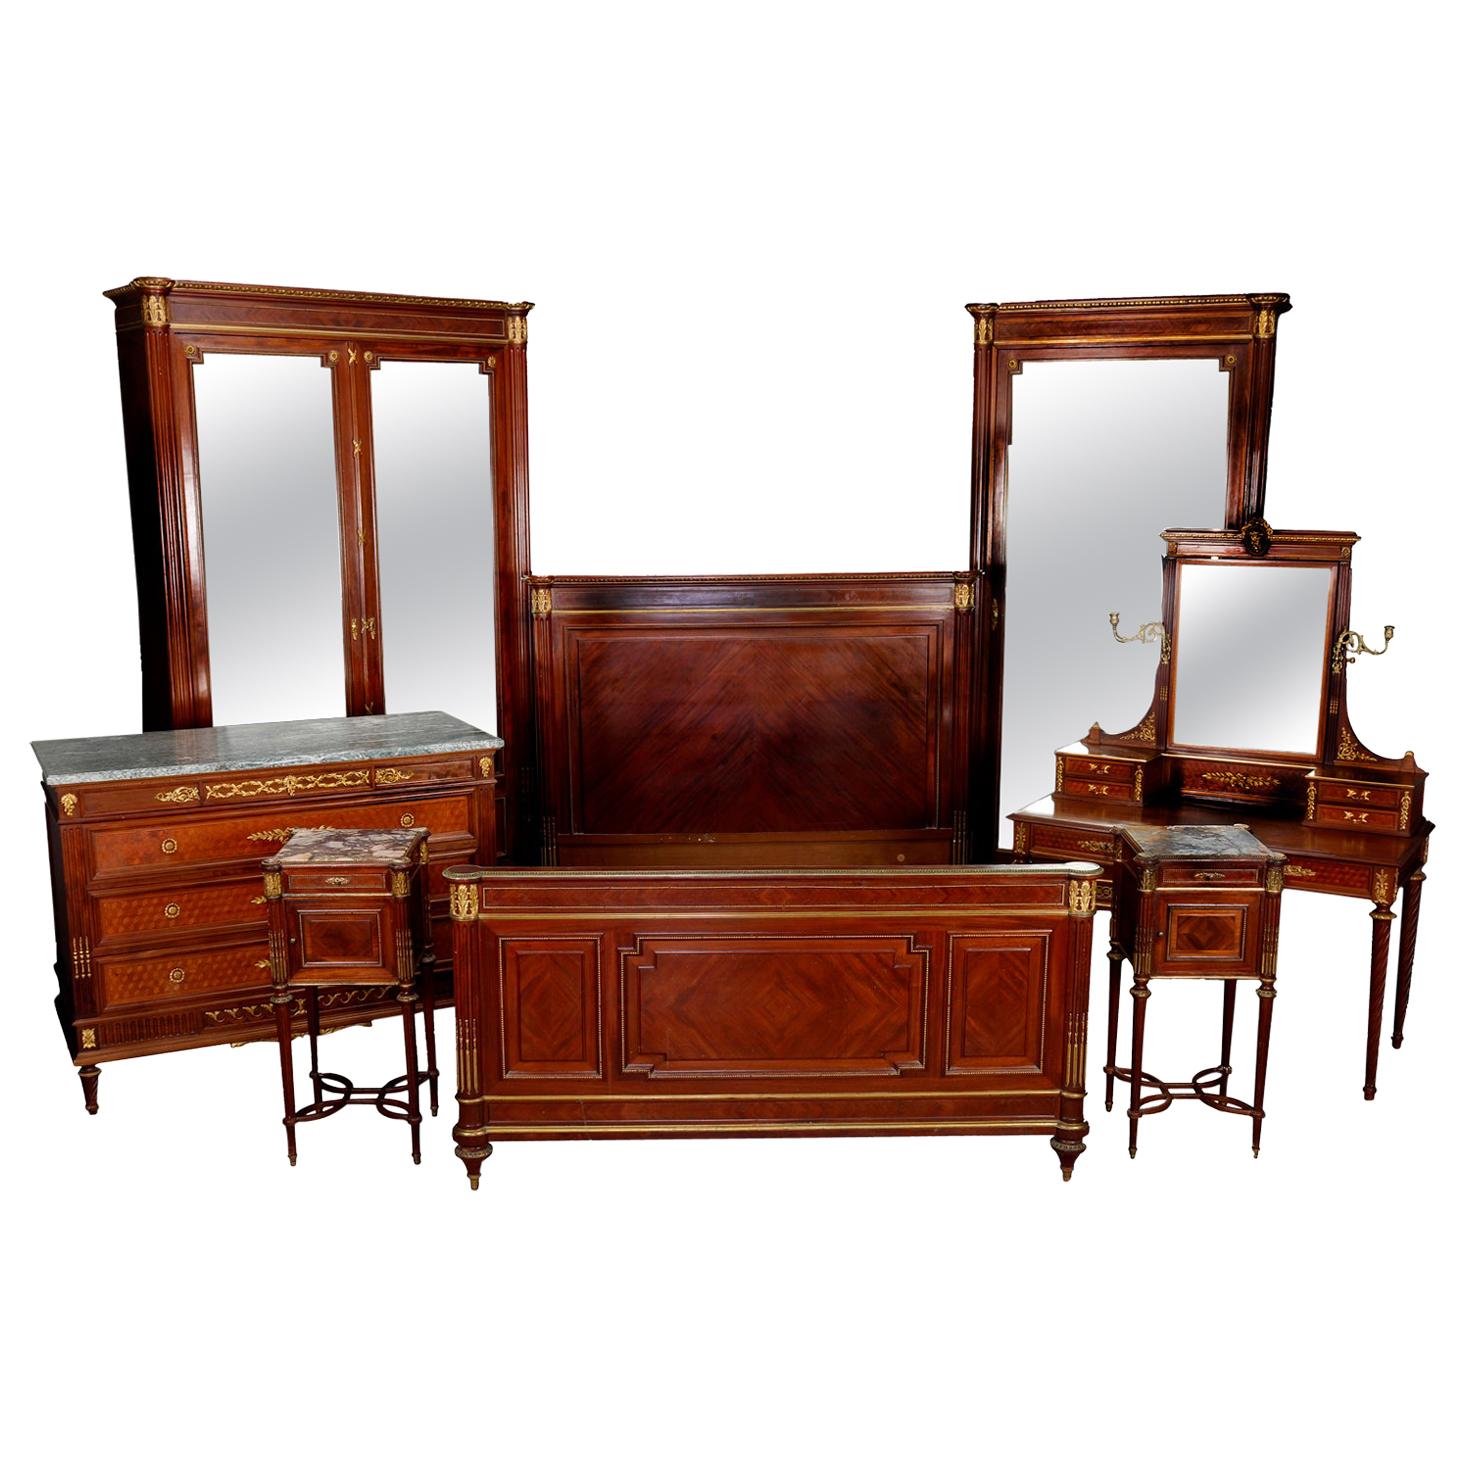 7-Piece French Louis XVI Mahogany Marquetry & Ormolu Bedroom Suite, Signed